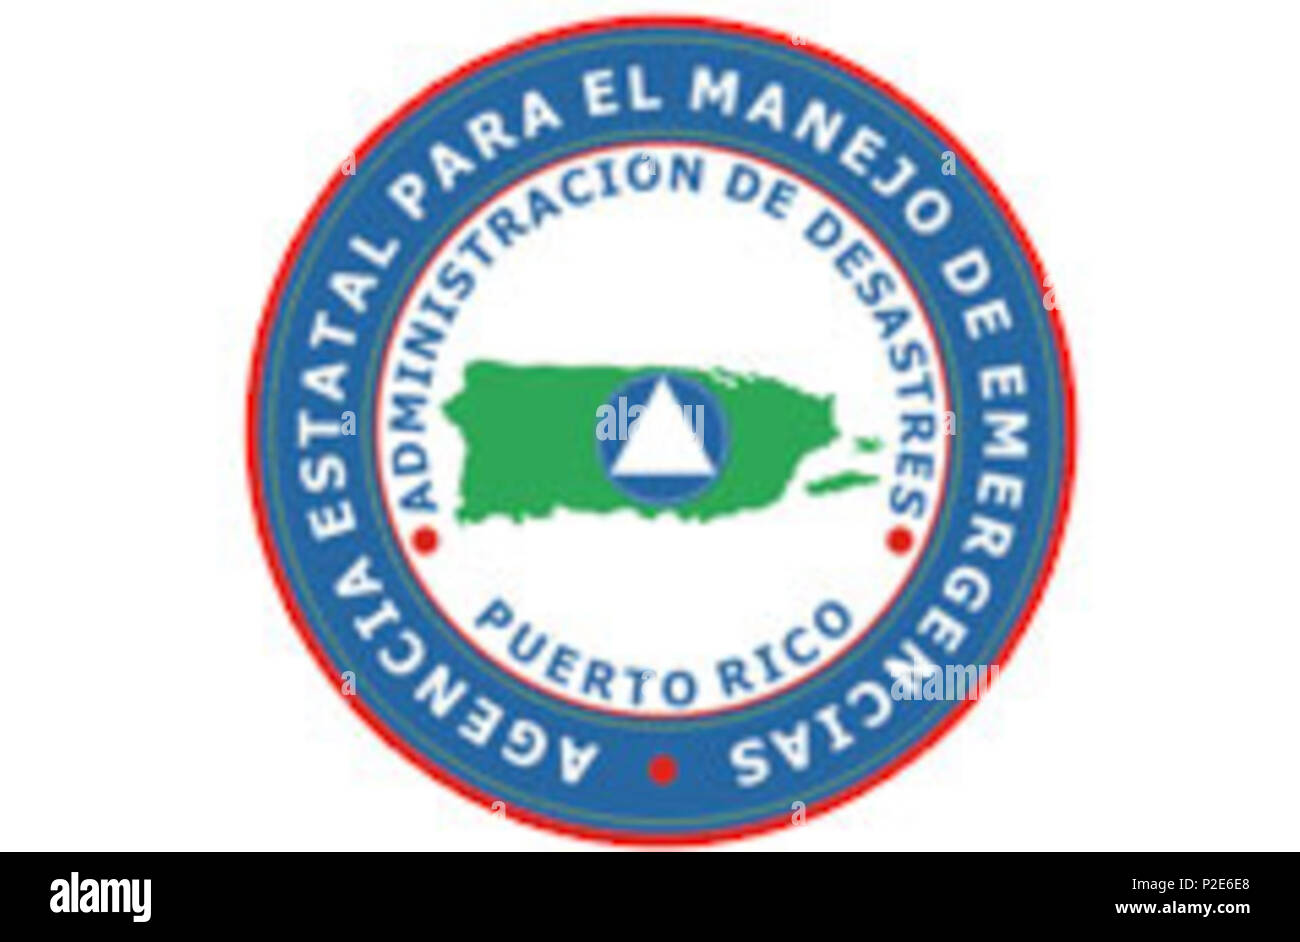 . English: Official emblem of the Puerto Rico State Agency for Emergency and Disaster Management . 30 December 2012 (original upload date). Puerto Rico State Agency for Emergency and Disaster Management 44 Puerto-rico-state-agency-for-emergency-and-disaster-management-emblem Stock Photo